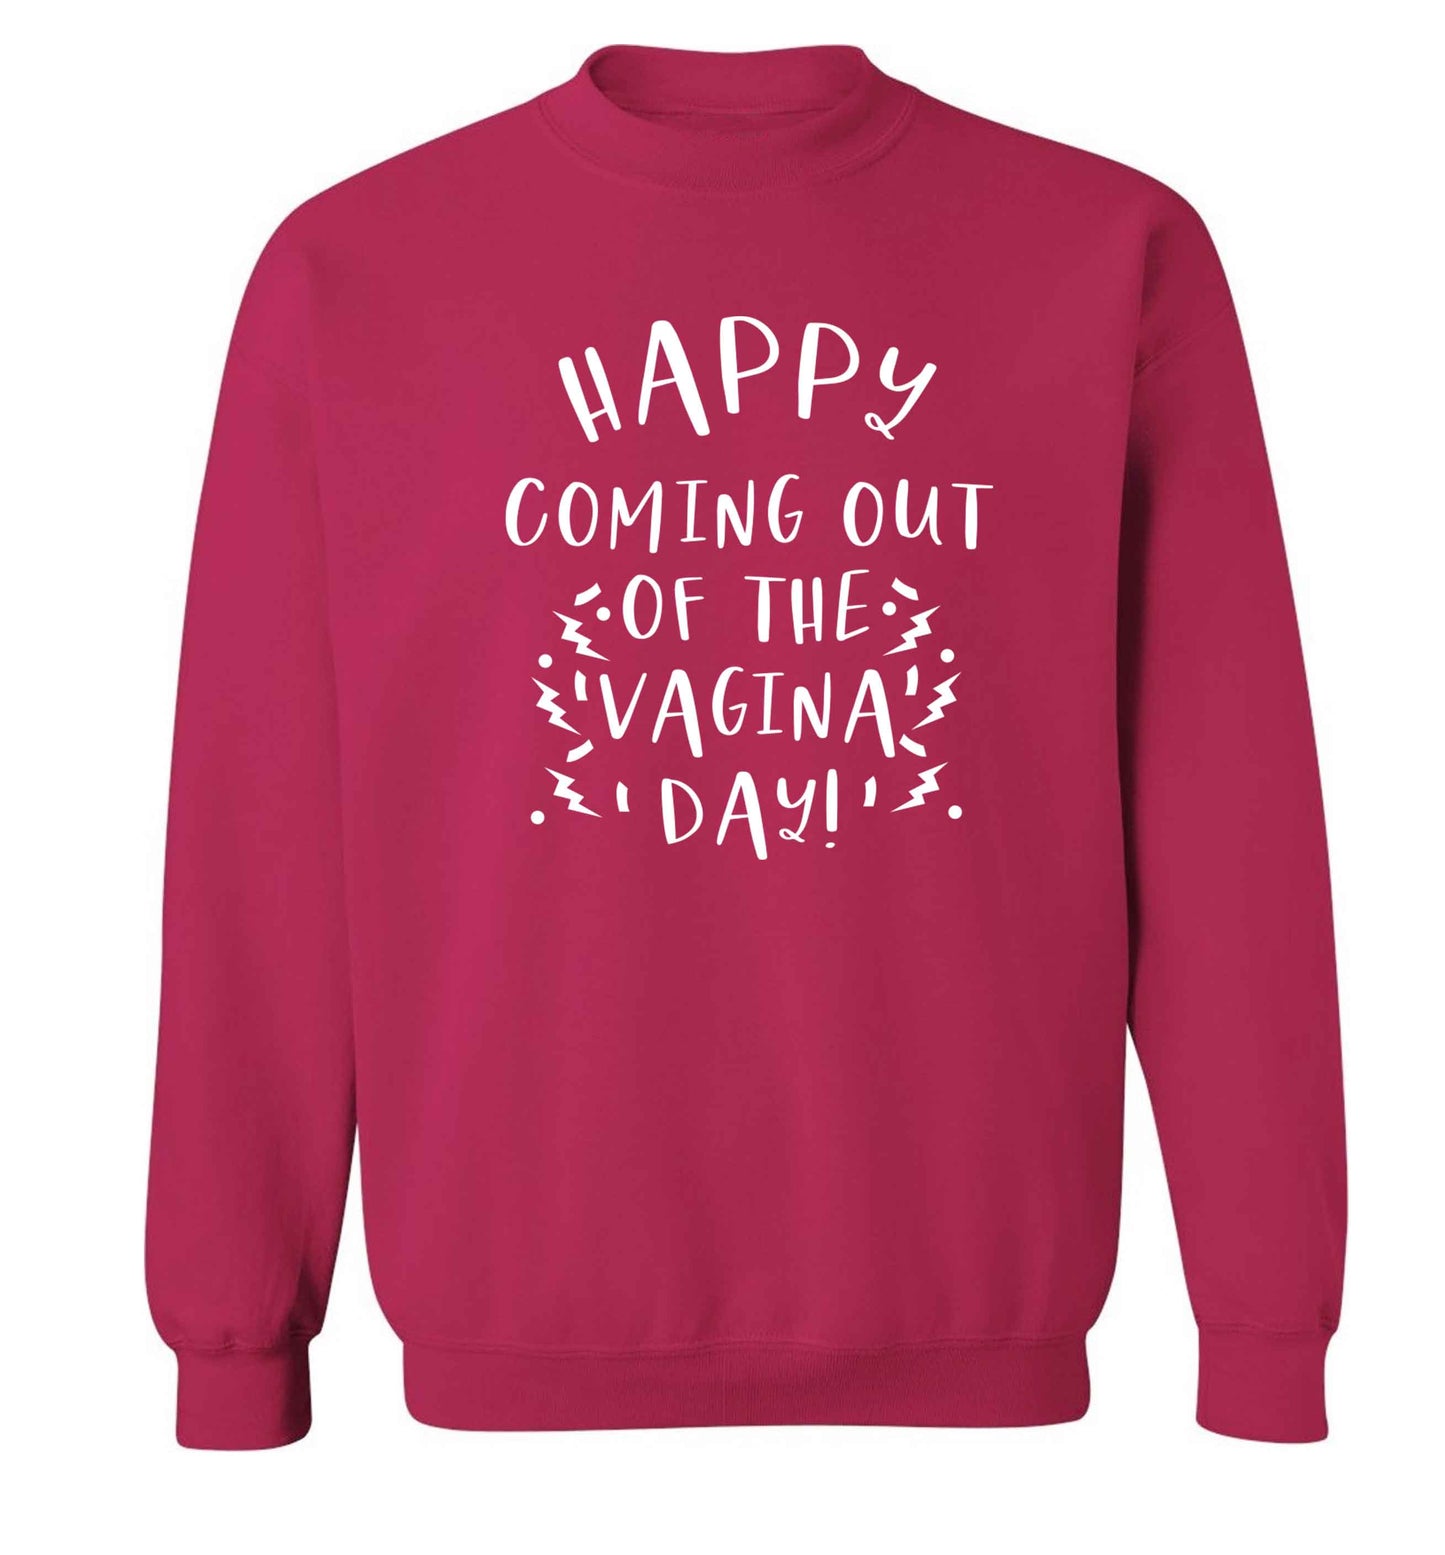 Happy coming out of the vagina day Adult's unisex pink Sweater 2XL